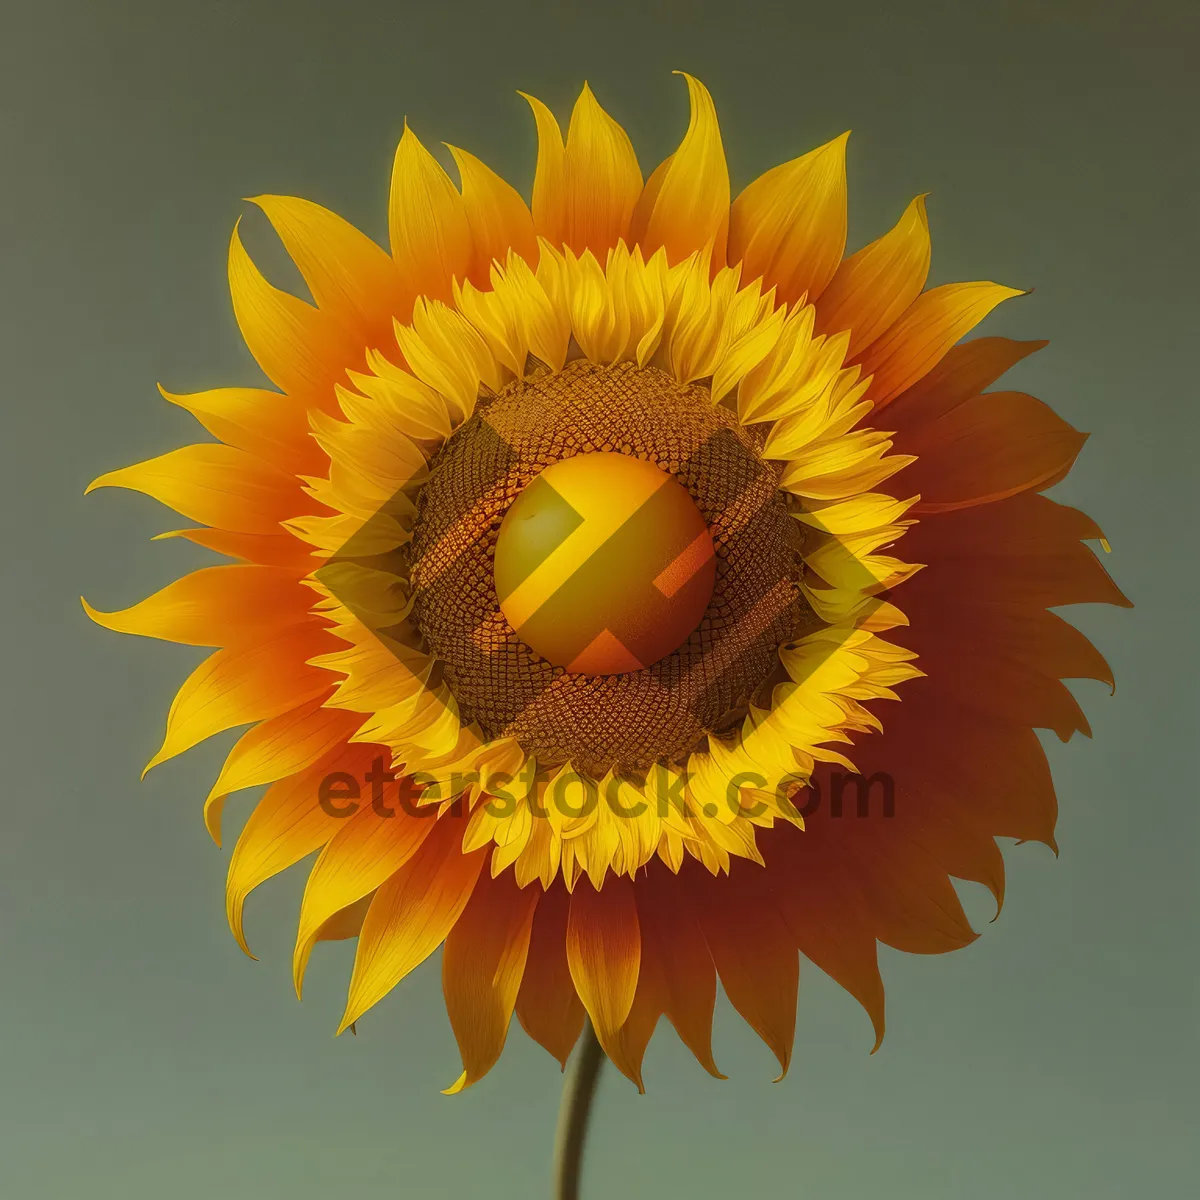 Picture of Vibrant Sunflower Blooming in Sunny Field